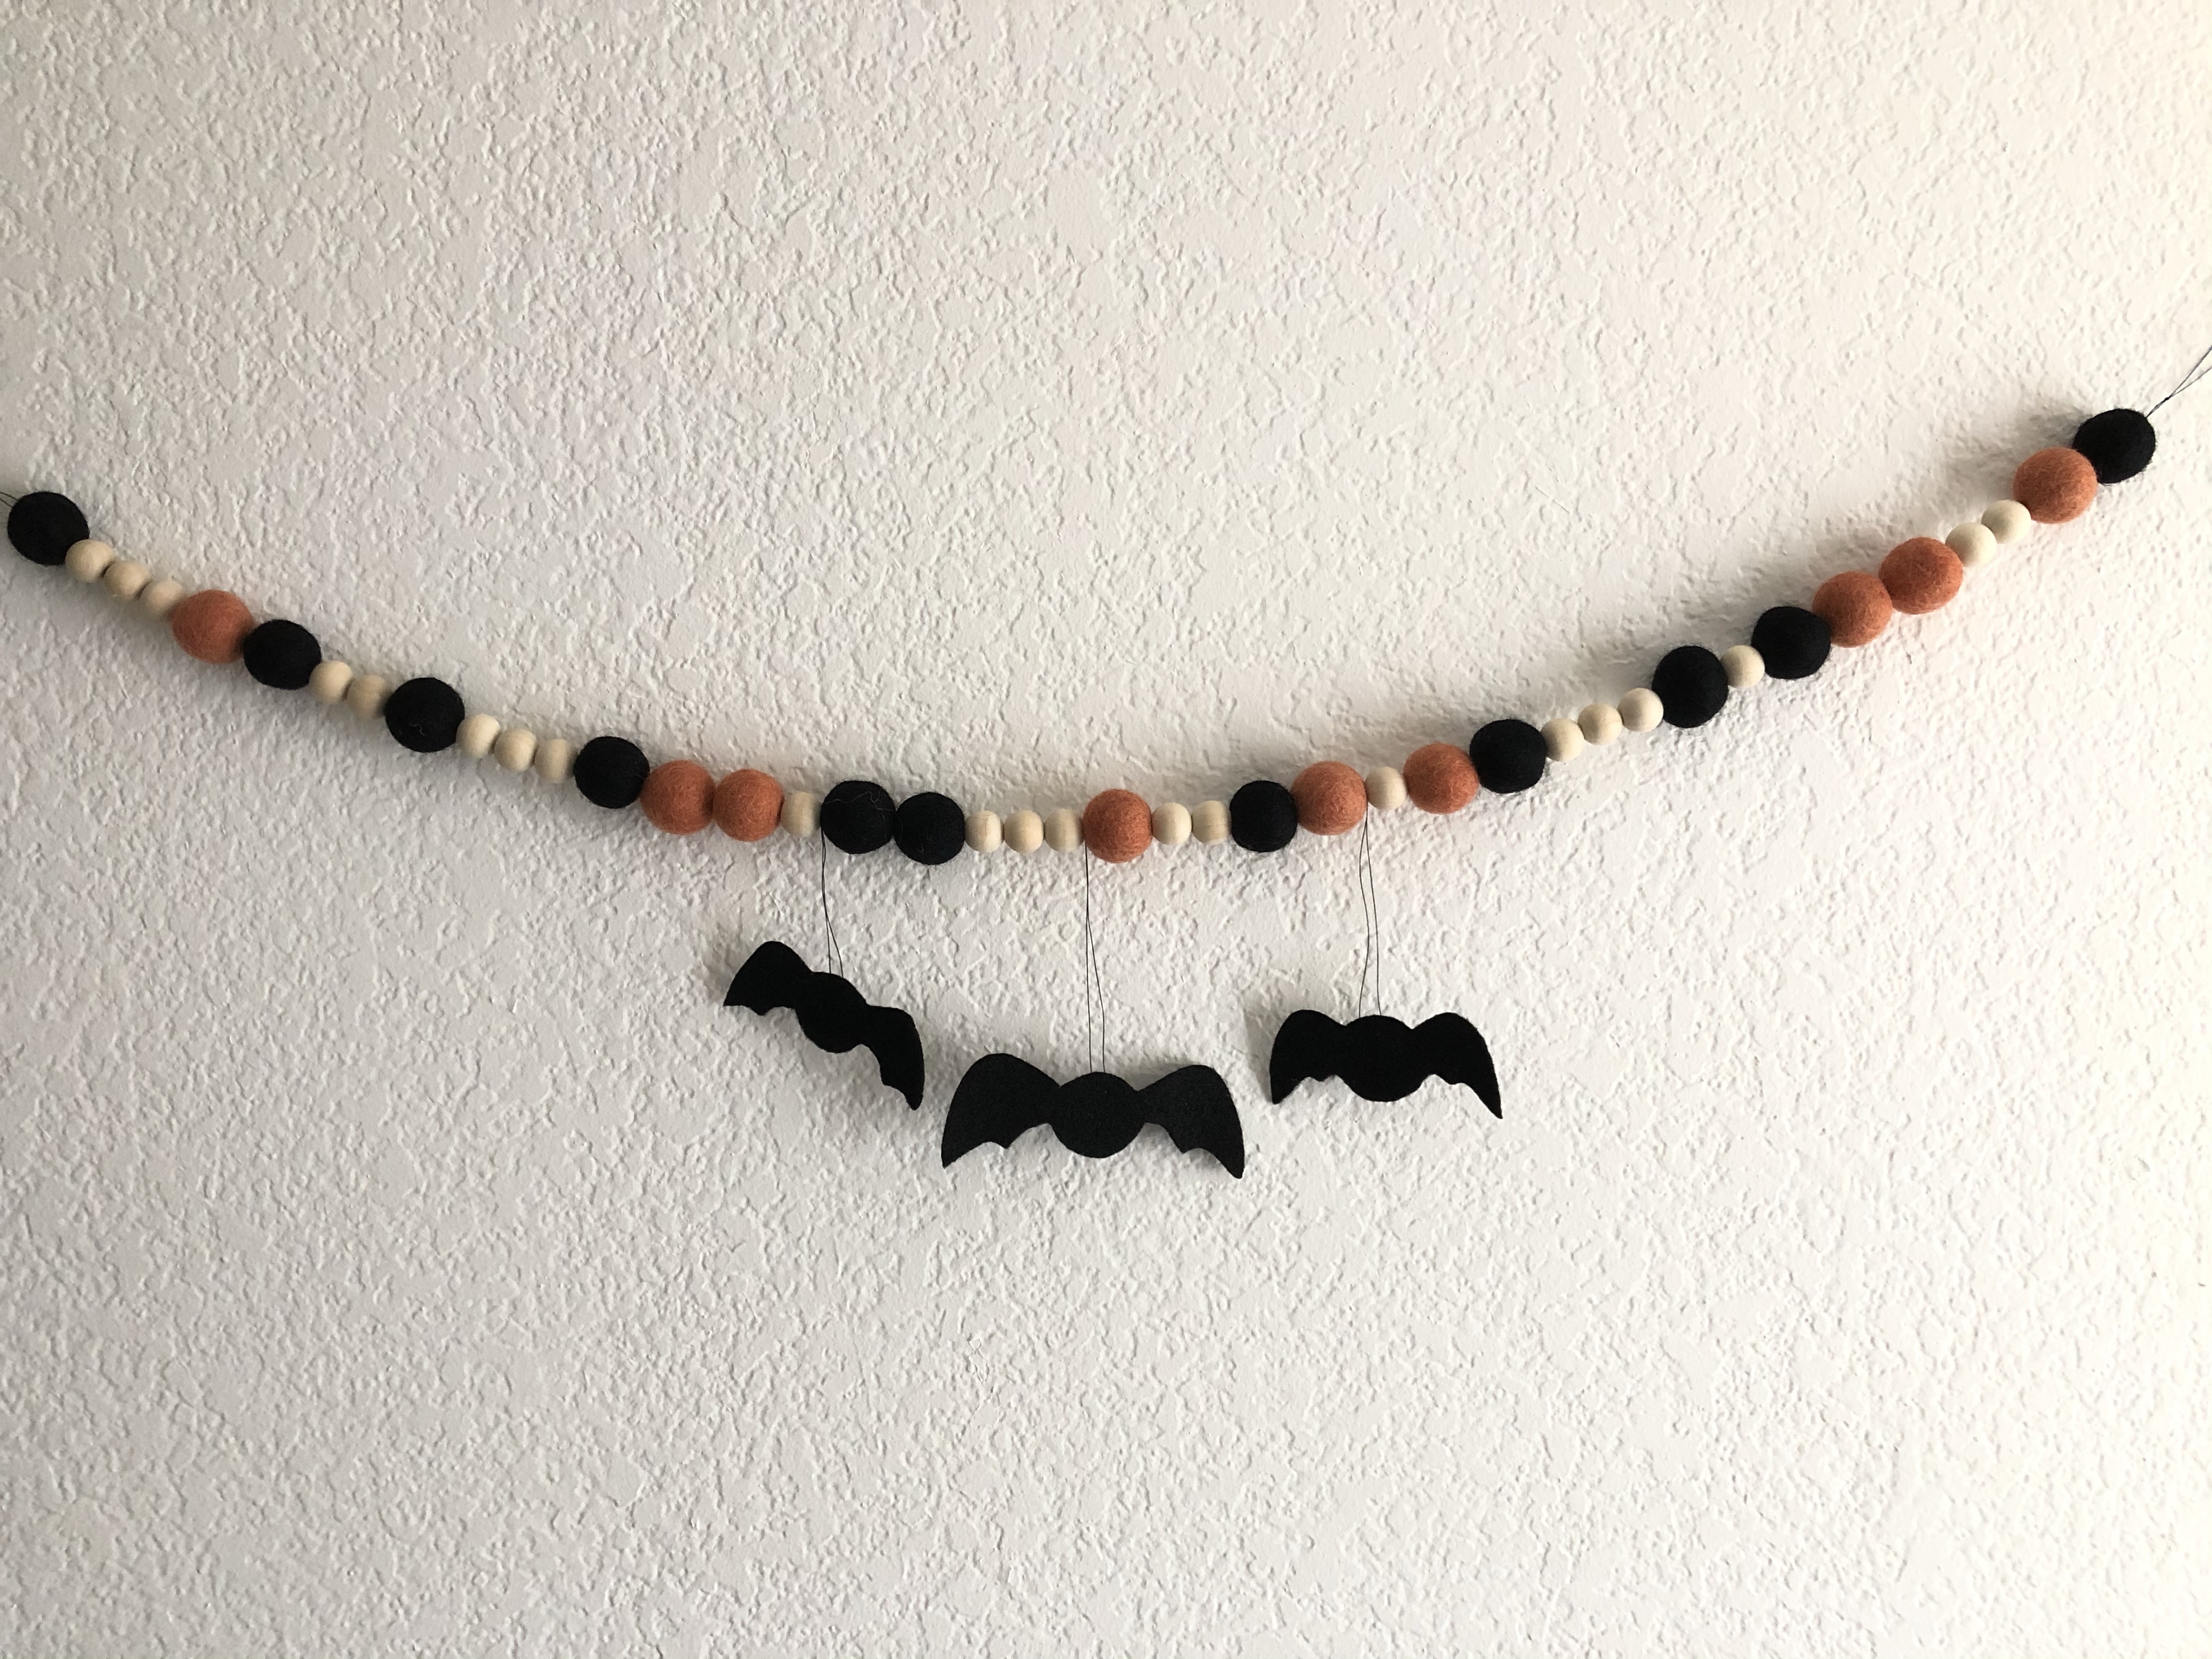 bats and beads.